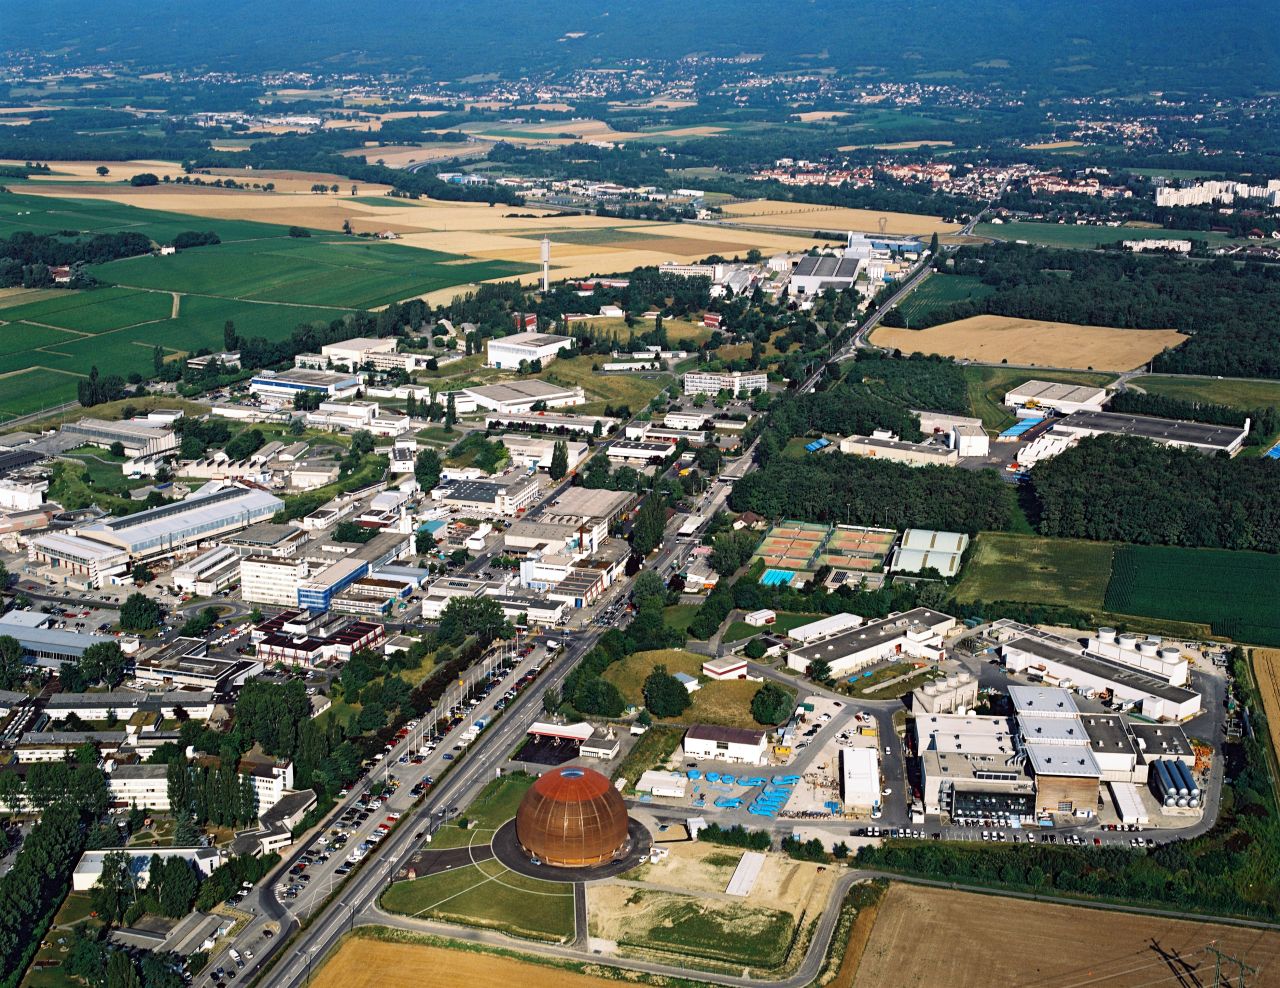 CERN's Globe of Science and Innovation exhibition centre and the nearby Meyrin site are seen from the air. The surface buildings which provide access and support for the ATLAS experiment, one of four experiments on the LHC, can also be seen on the right.